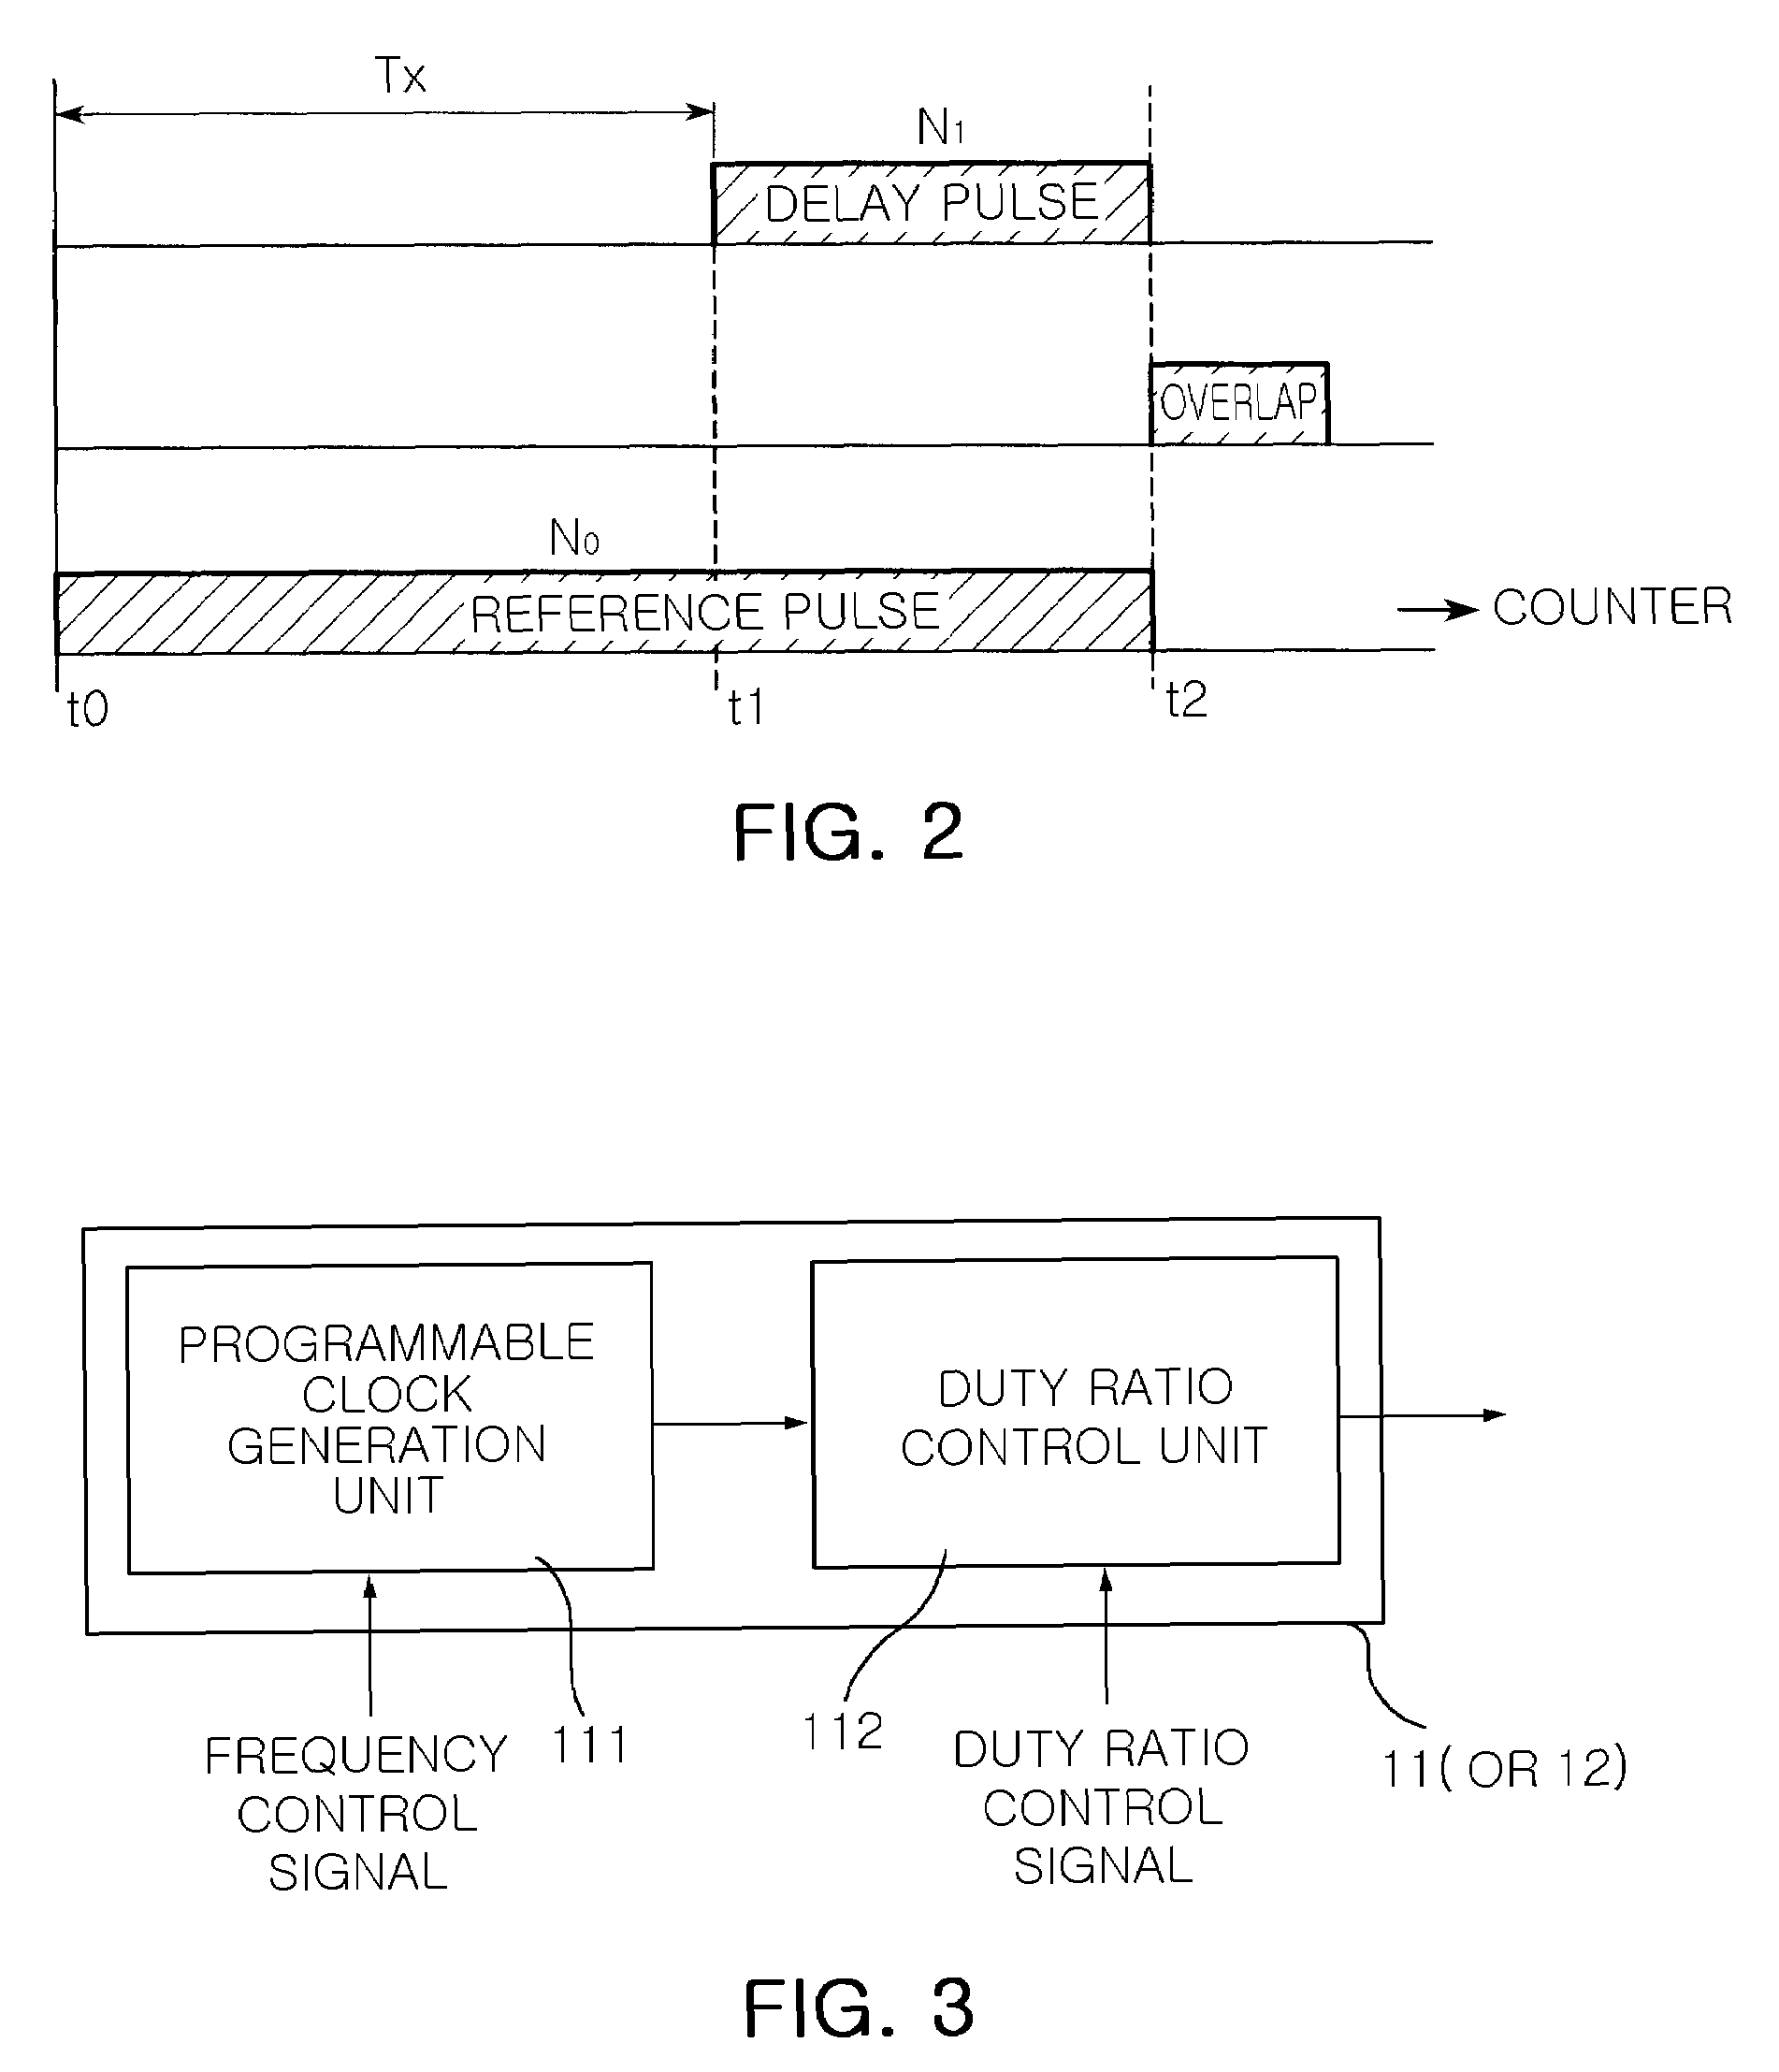 Distance measuring apparatus capable of controlling range and resolution